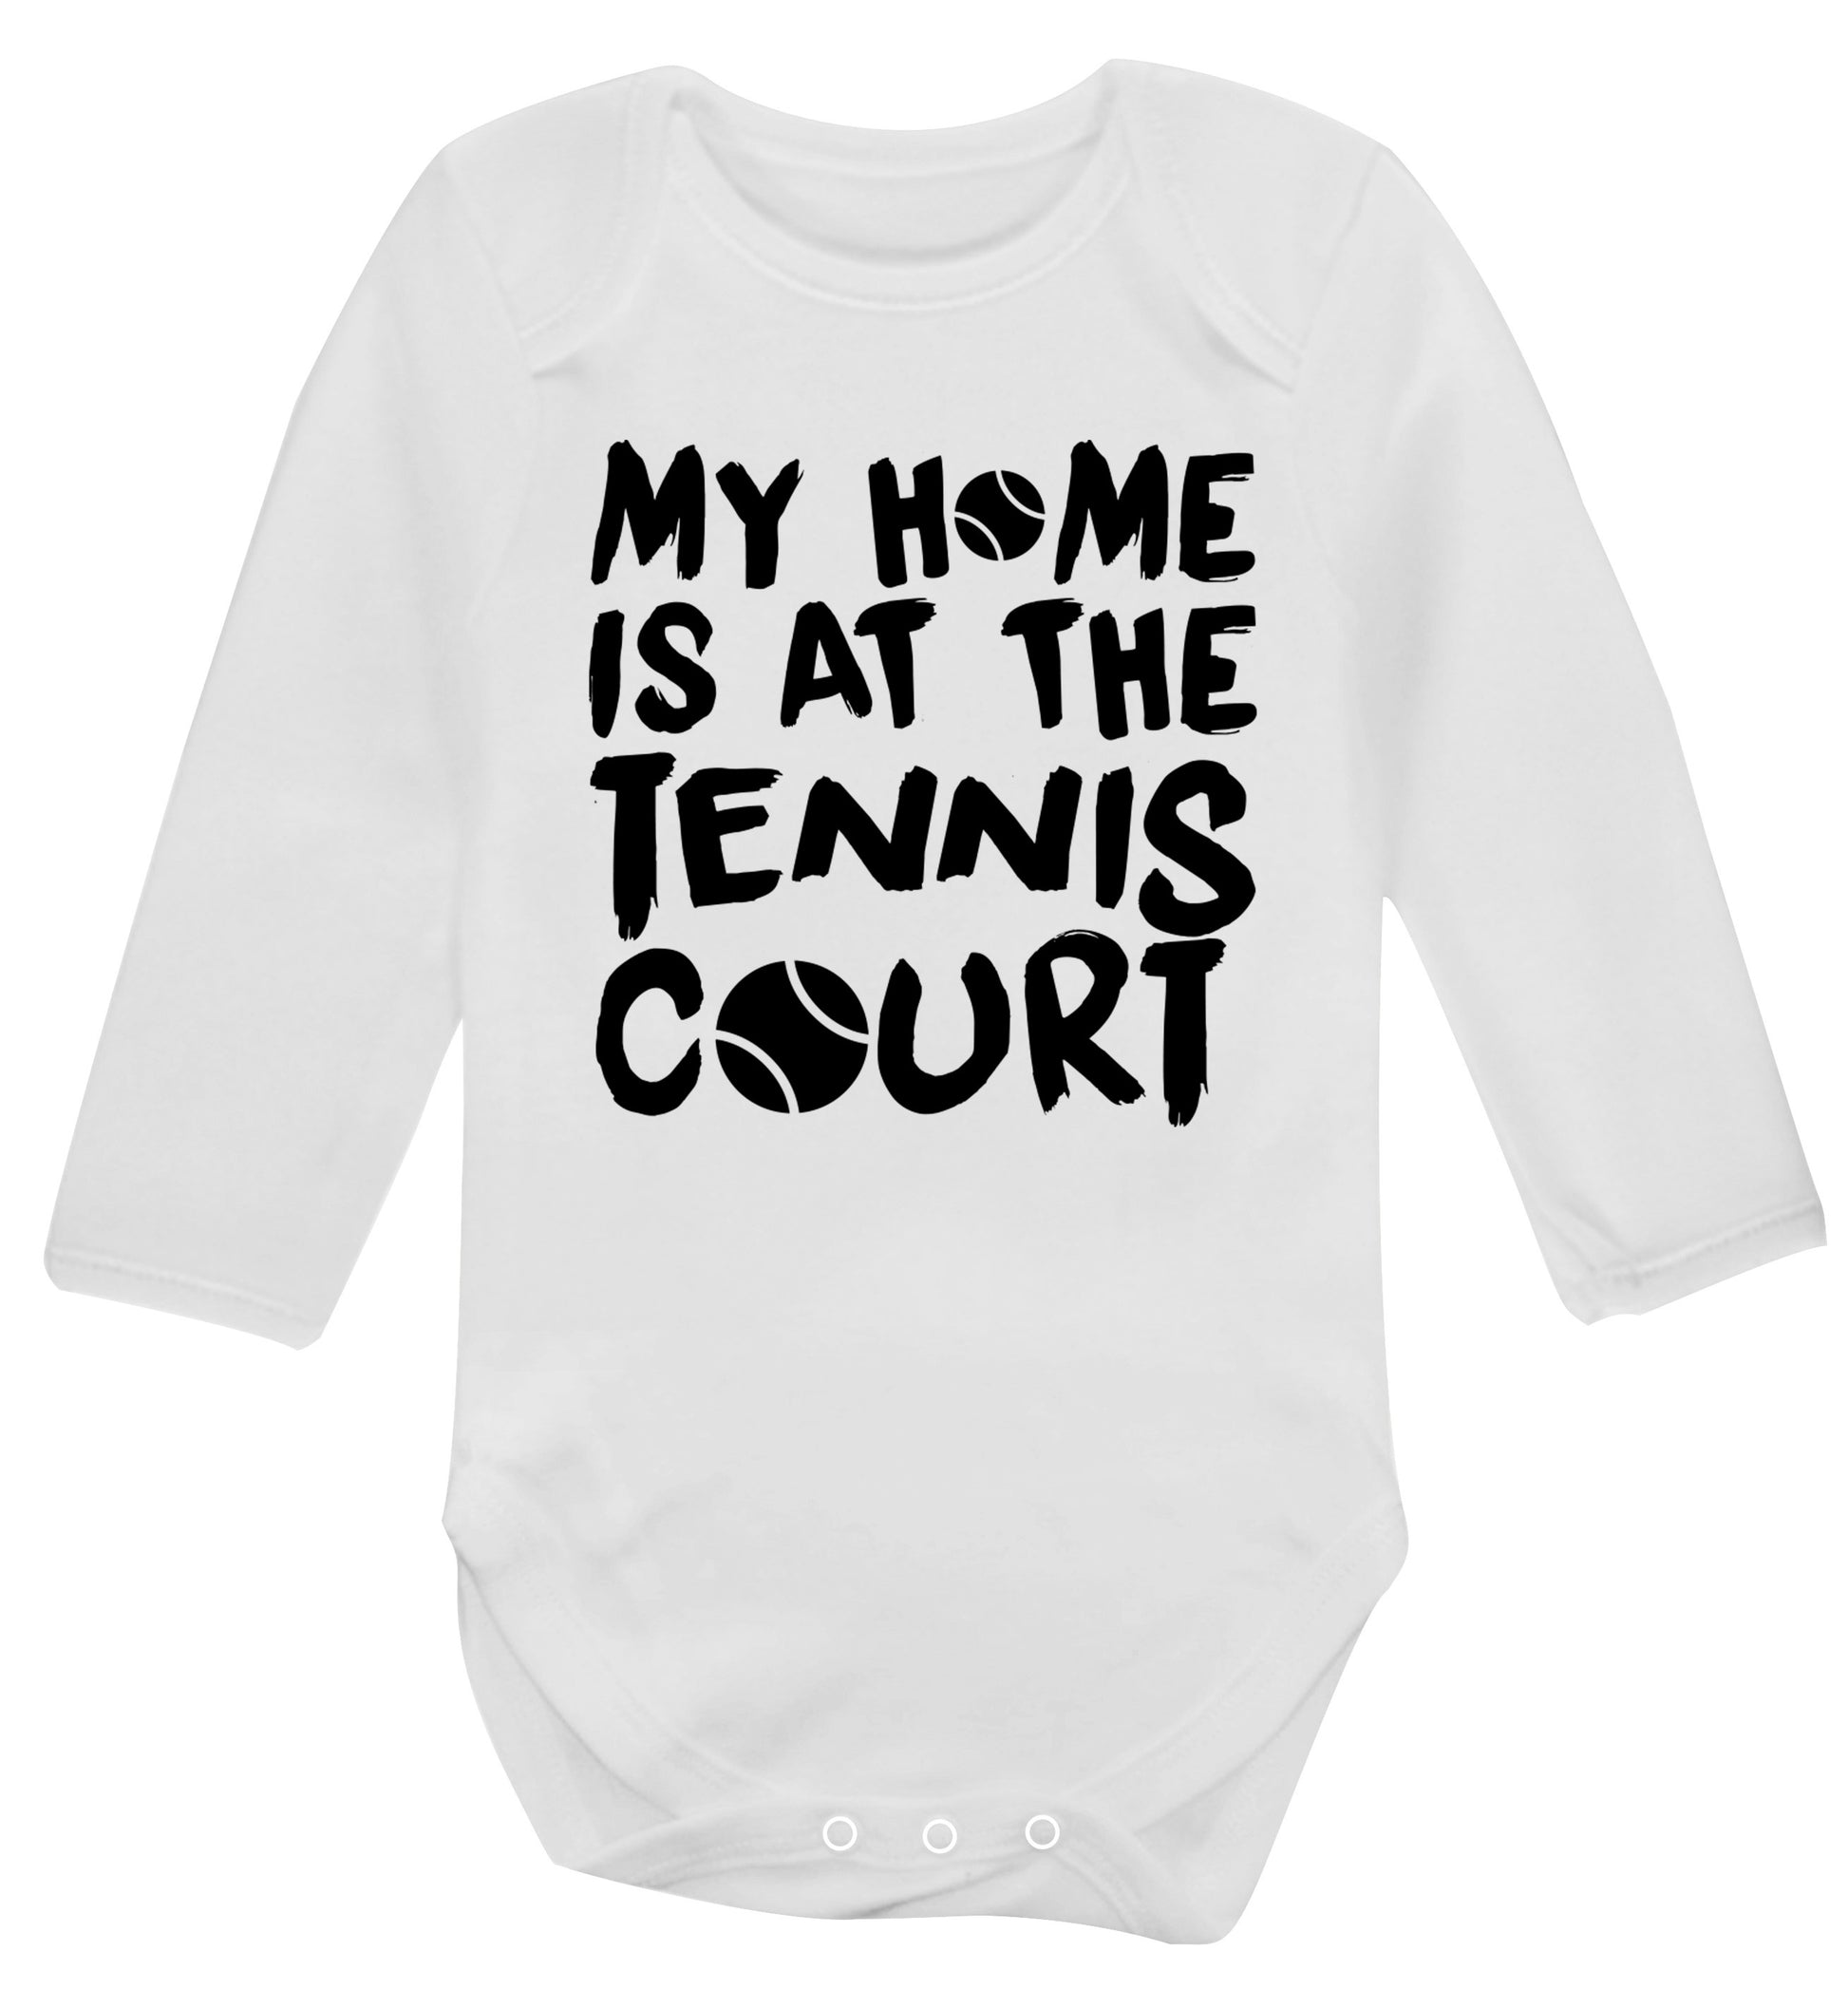 My home is at the tennis court Baby Vest long sleeved white 6-12 months